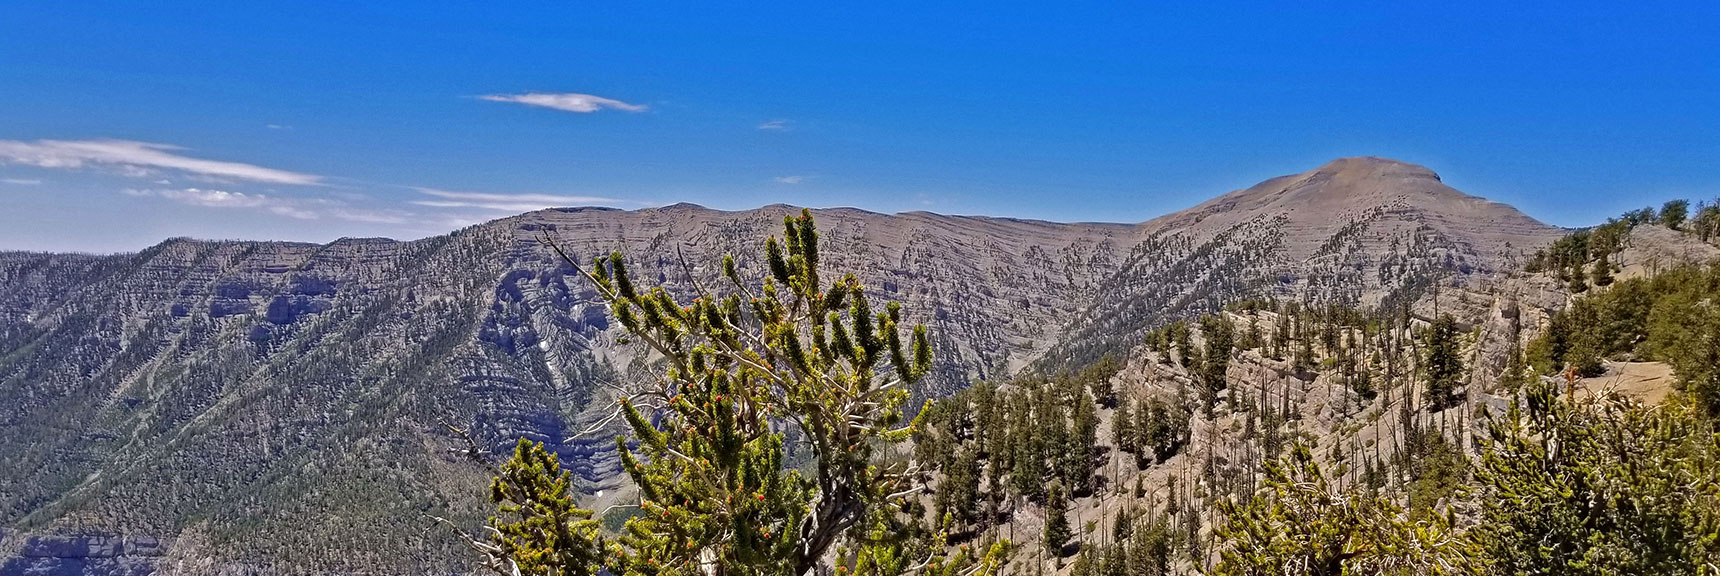 Charleston Peak (right) and Kyle Canyon South Ridge | Lee to Kyle Canyon | Foxtail Approach | Mt Charleston Wilderness | Spring Mountains, Nevada